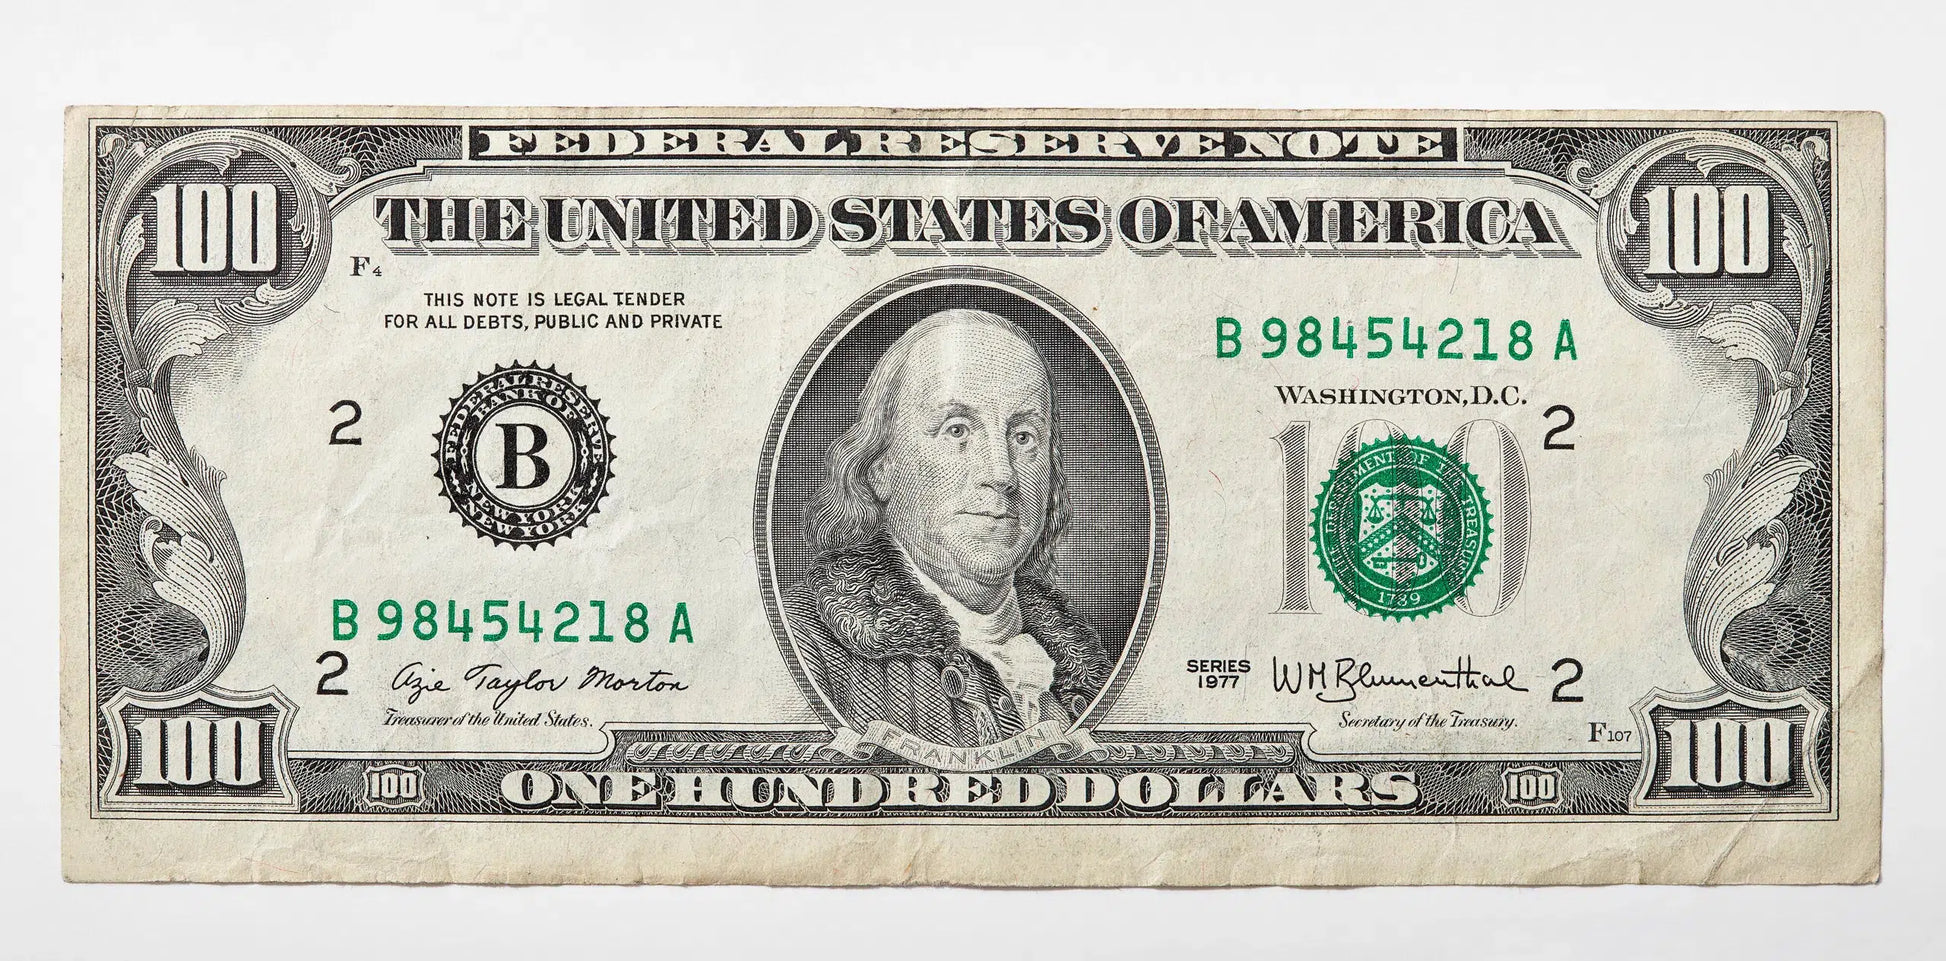 C Note, USA $100, by Peter Andrew-PurePhoto